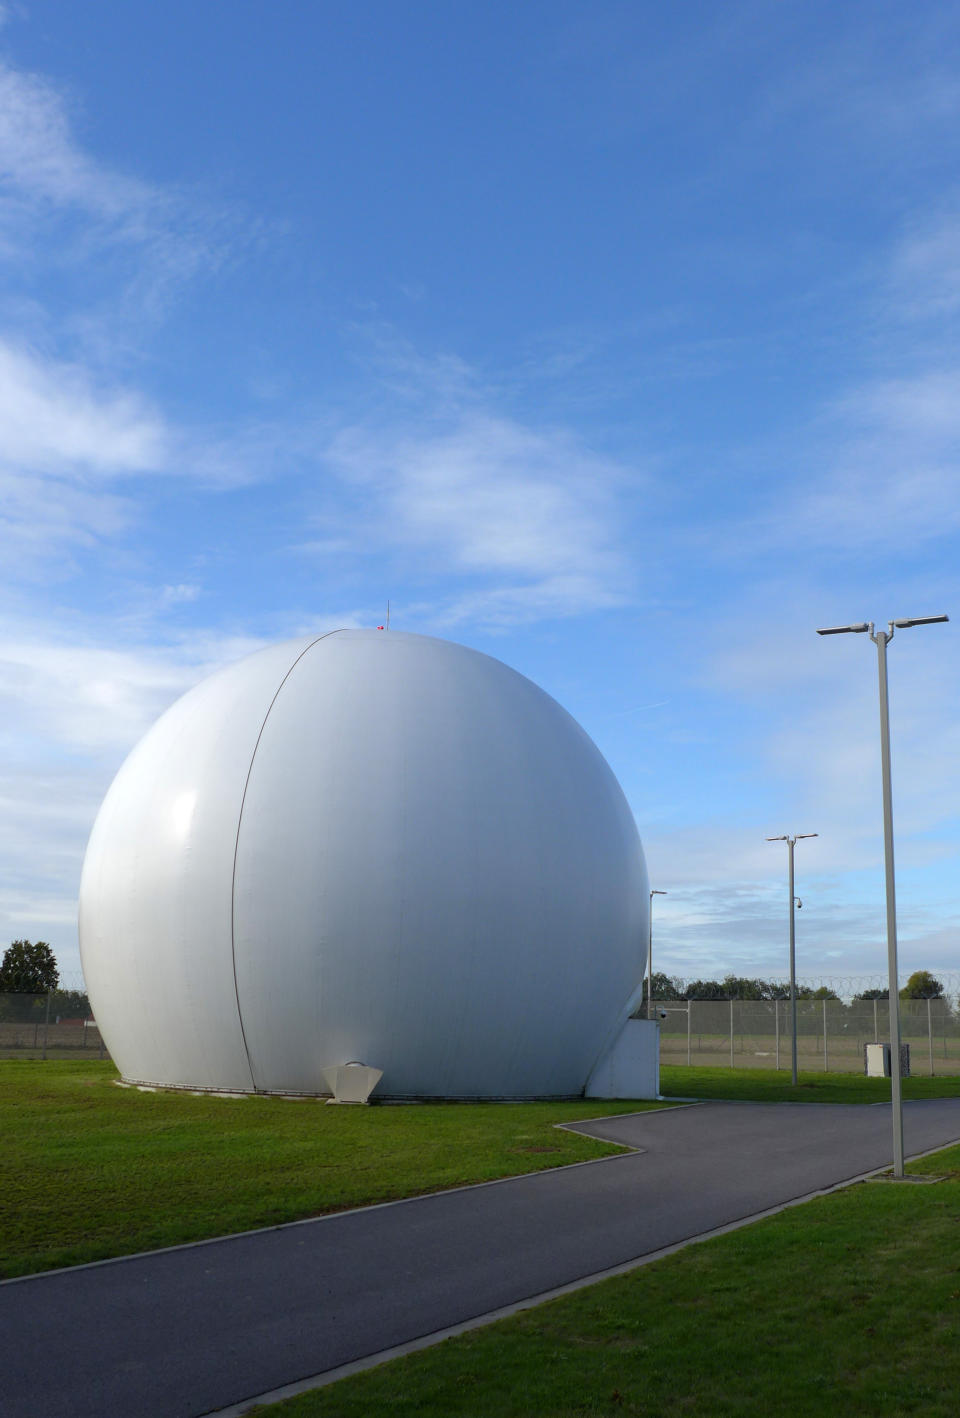 A Kevlar dome at the Kester Satellite Ground Station in Kester, Belgium, Thursday, Oct. 15, 2020. This week, the site at Kester, which has been in use for decades but was totally overhauled in 2014, is set to fall under a new orbit, when NATO announces that it is creating a space center to help manage satellite communications and key parts of its military operations around the world. (AP Photo/Lorne Cook)